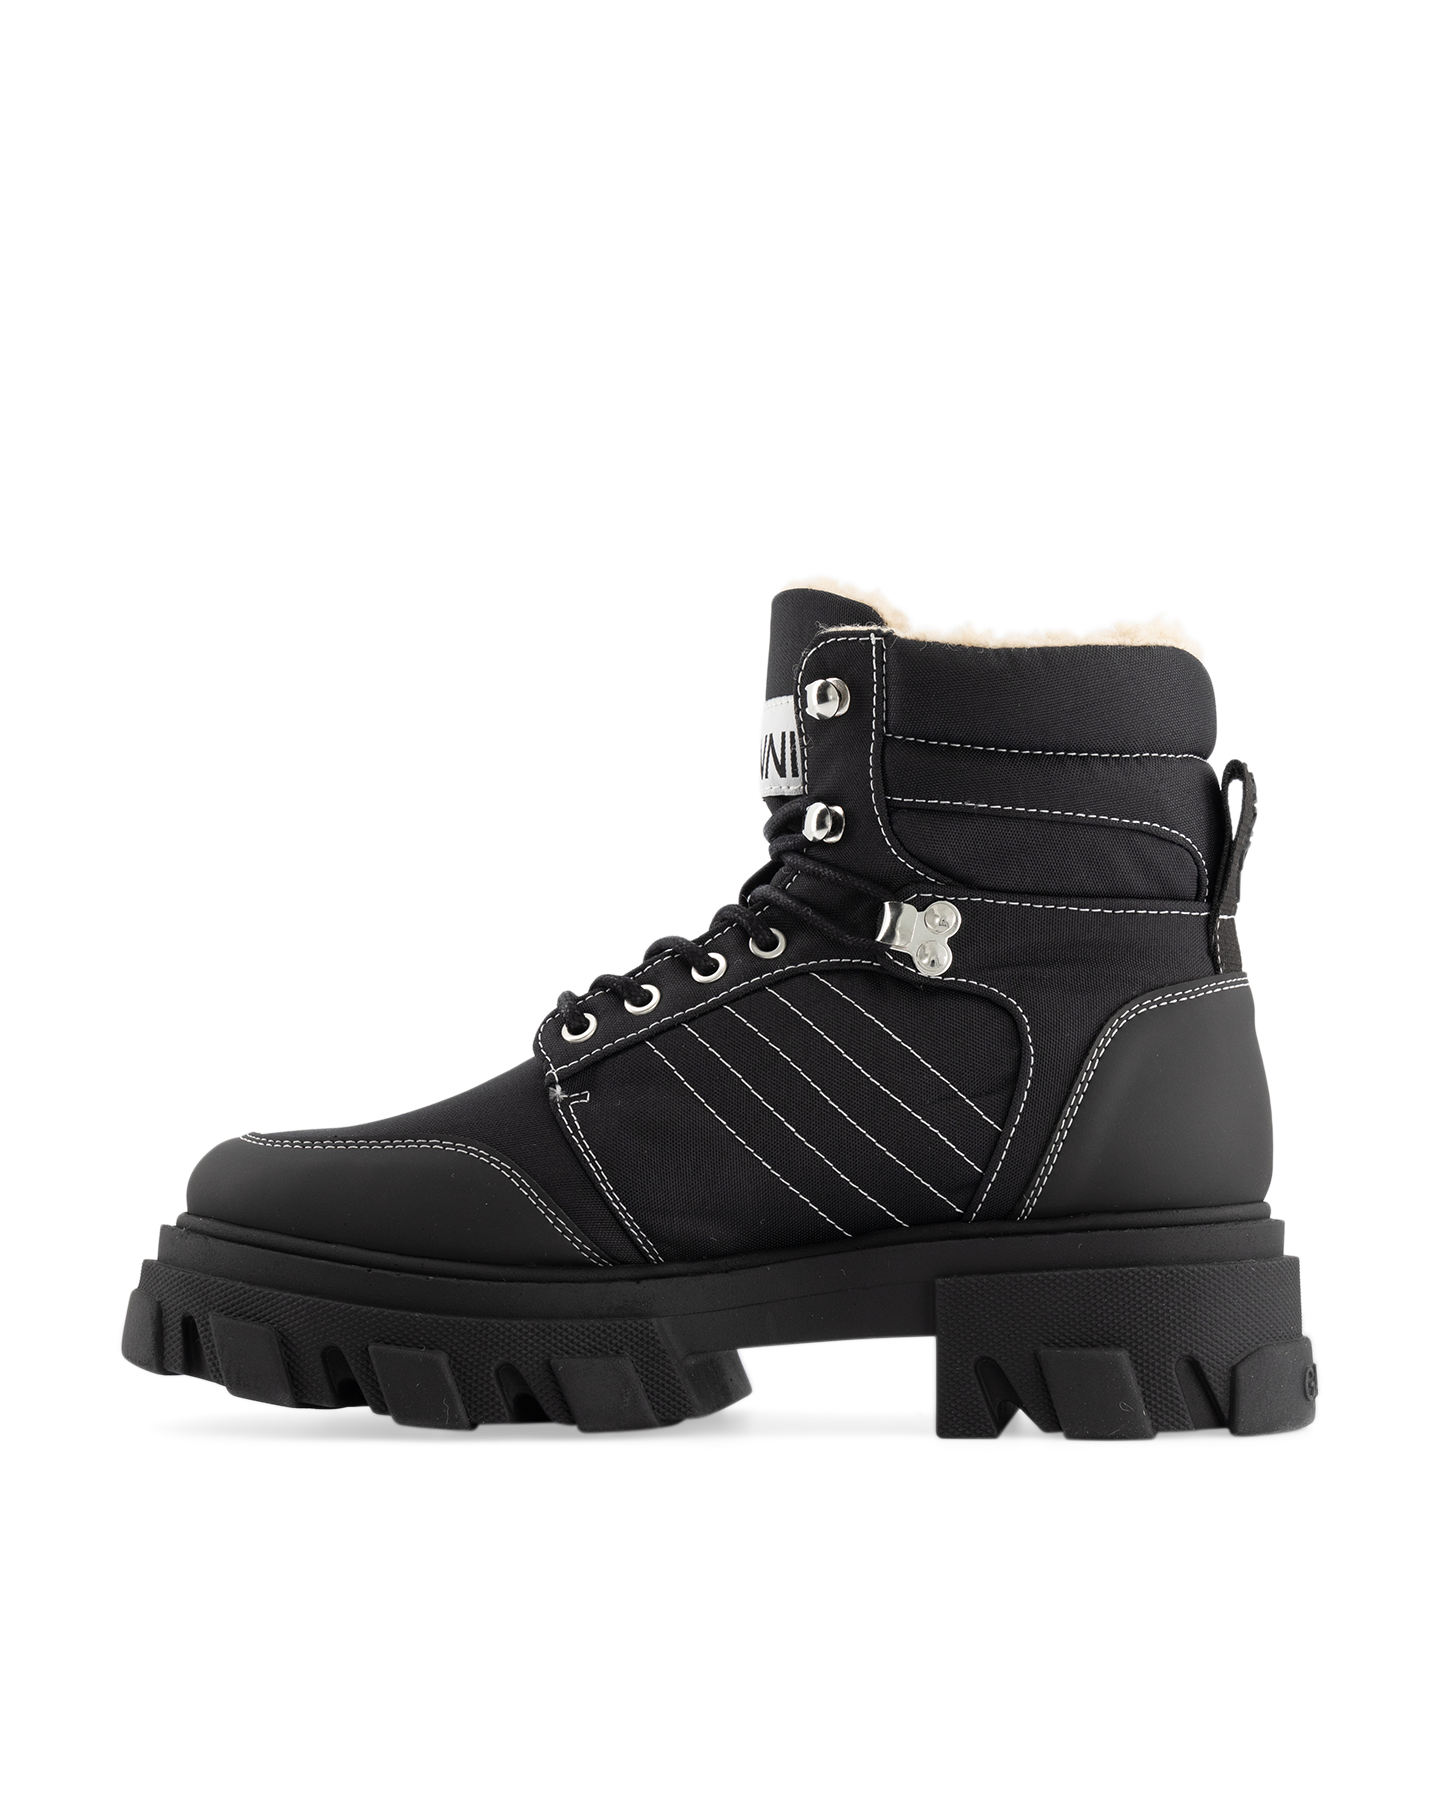 Ganni Cleated Lace Up Hiking Boot BLACK 4